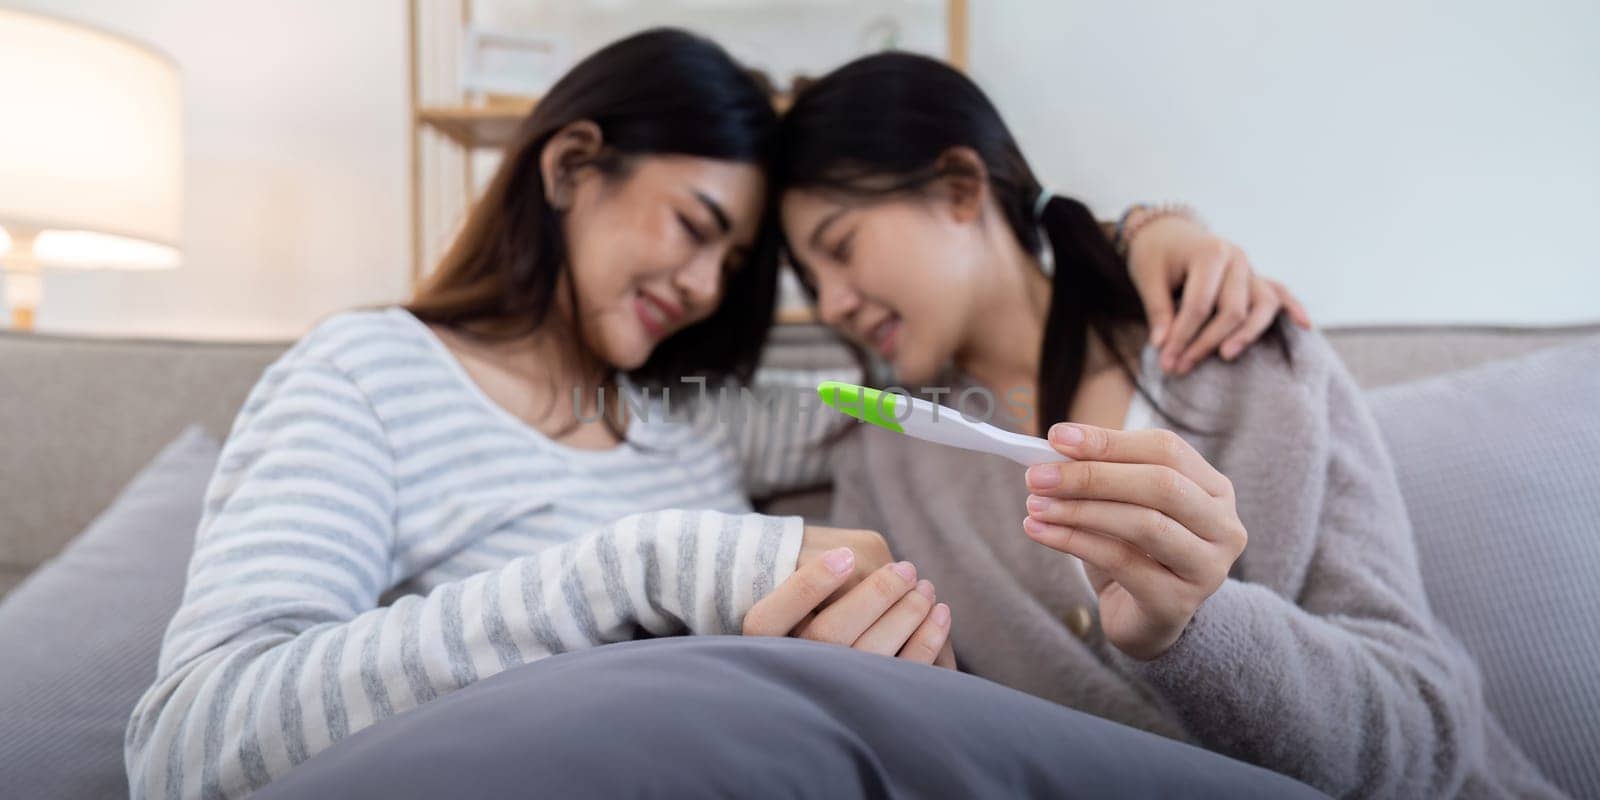 Couple smiling while looking at a positive pregnancy test on the couch at home. Women sharing a joyful moment anticipating parenthood together.